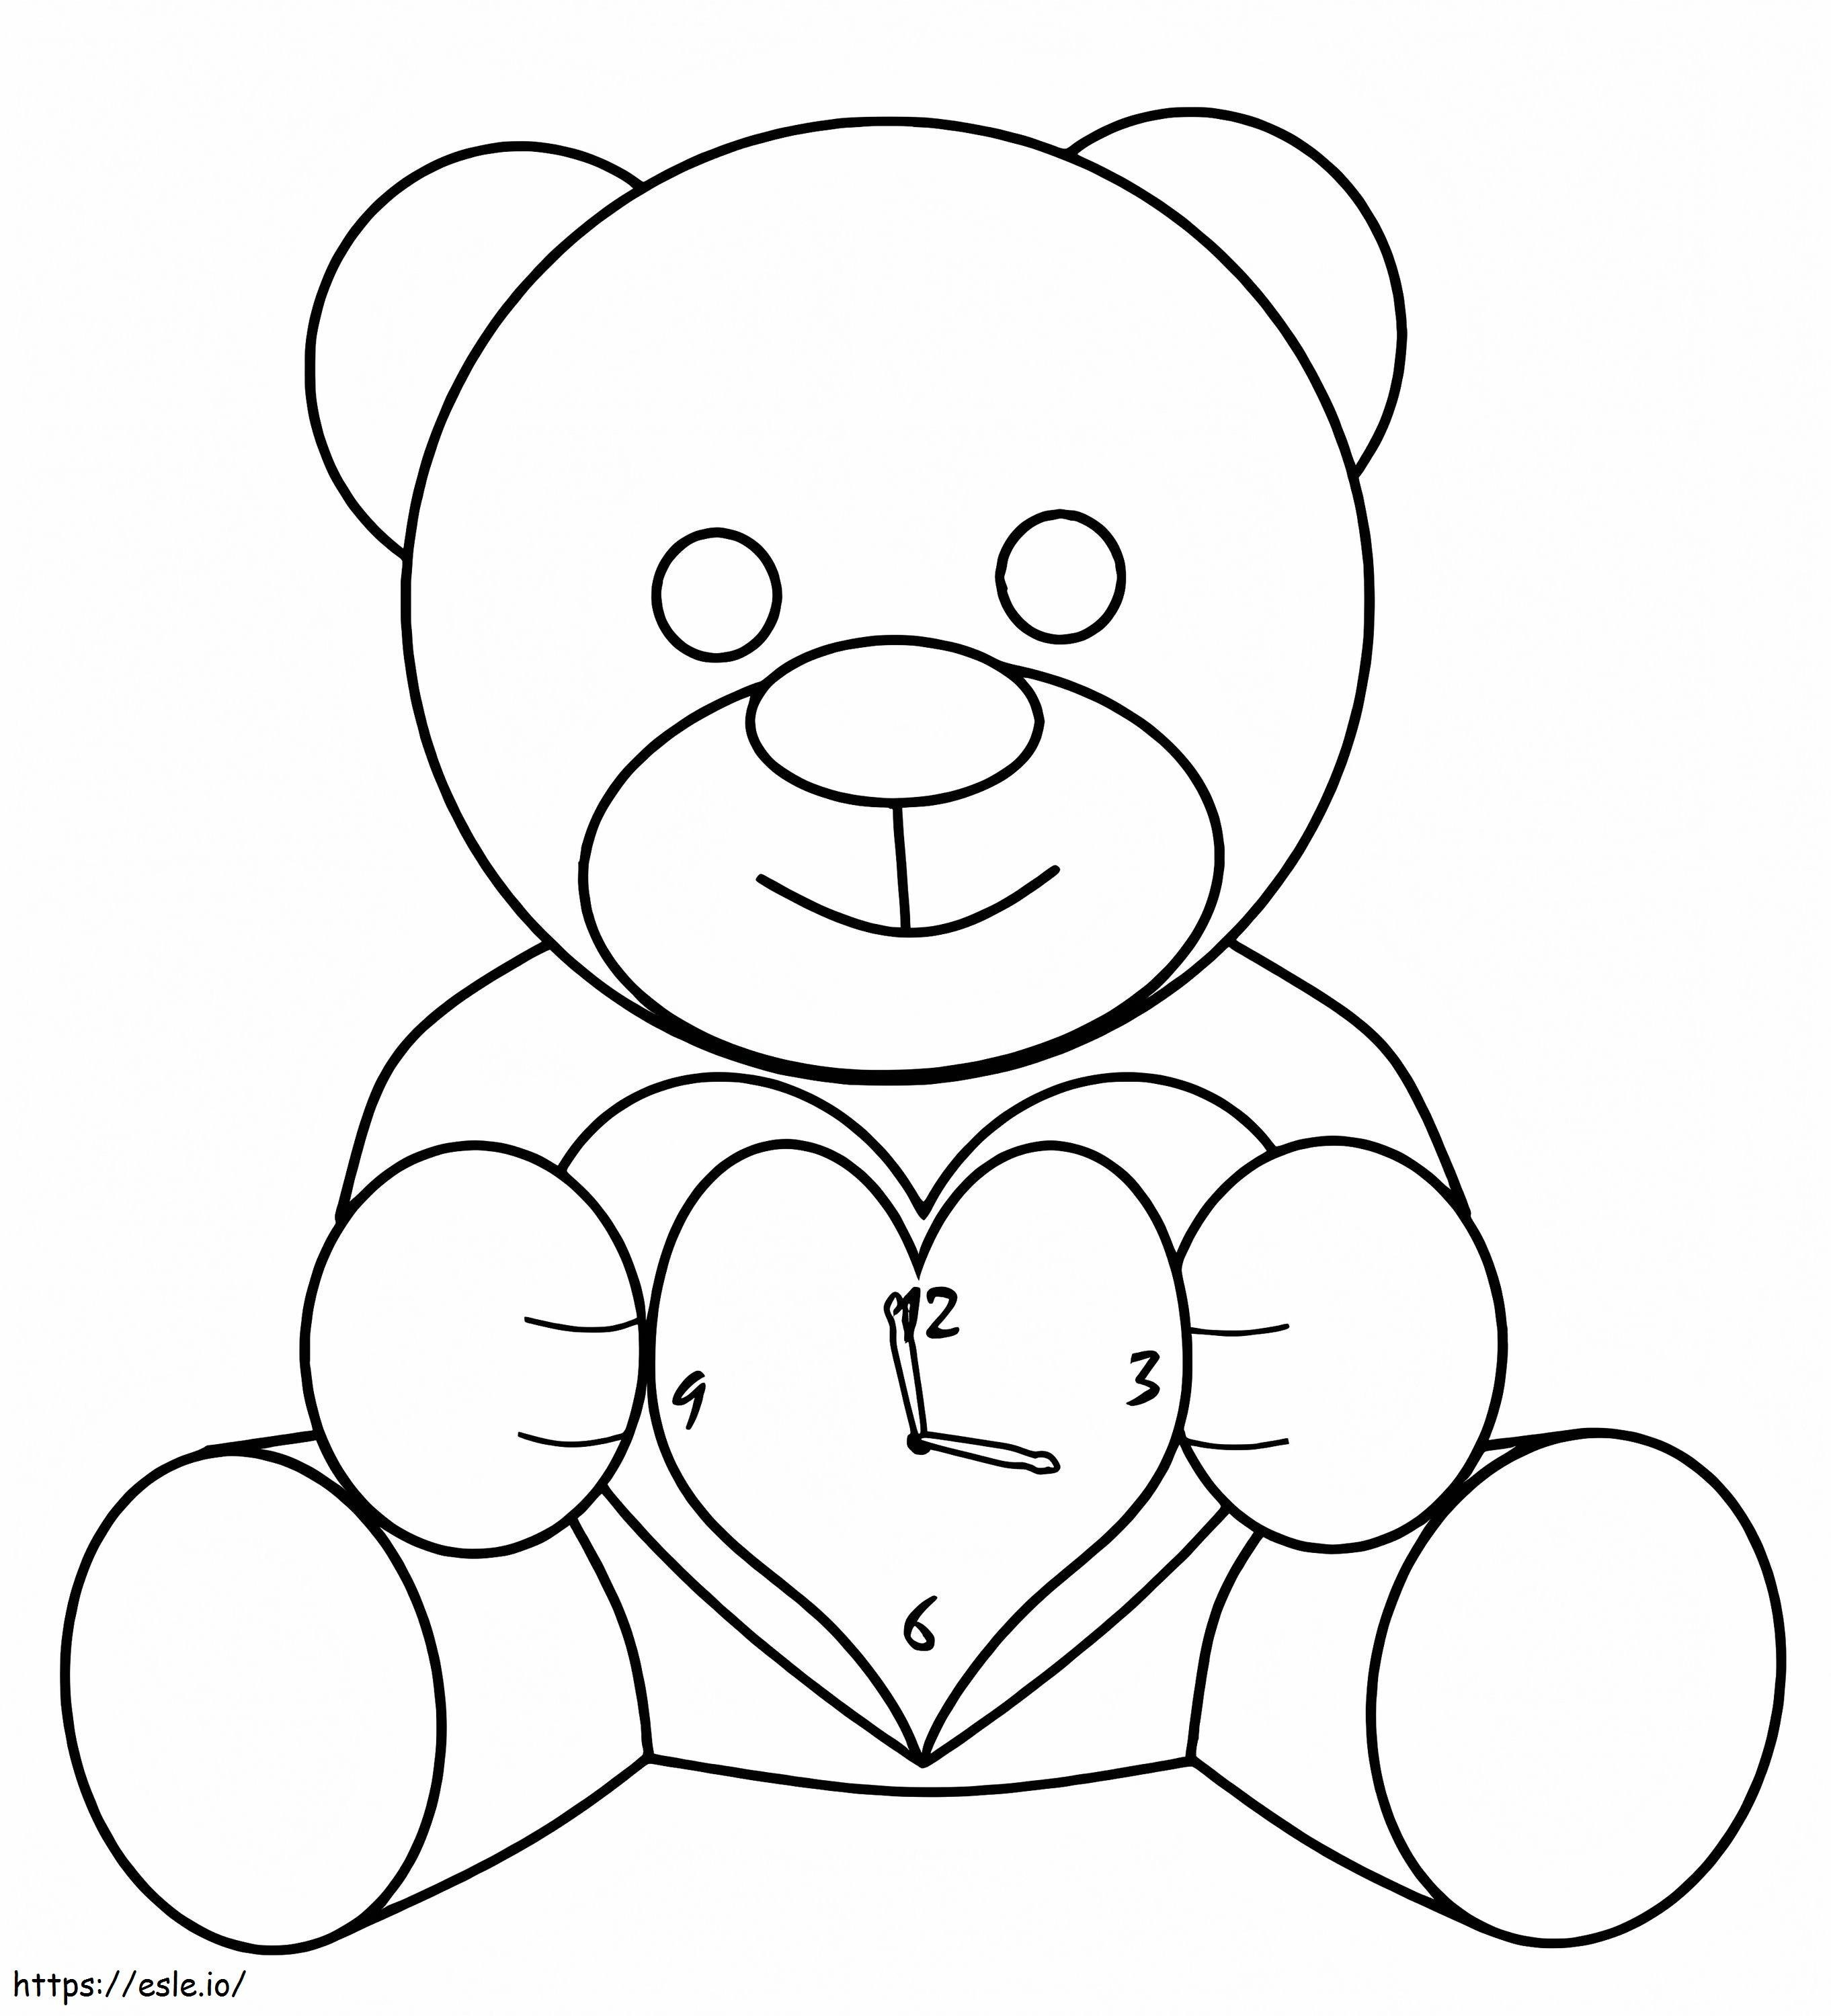 Teddy Bear Watch coloring page